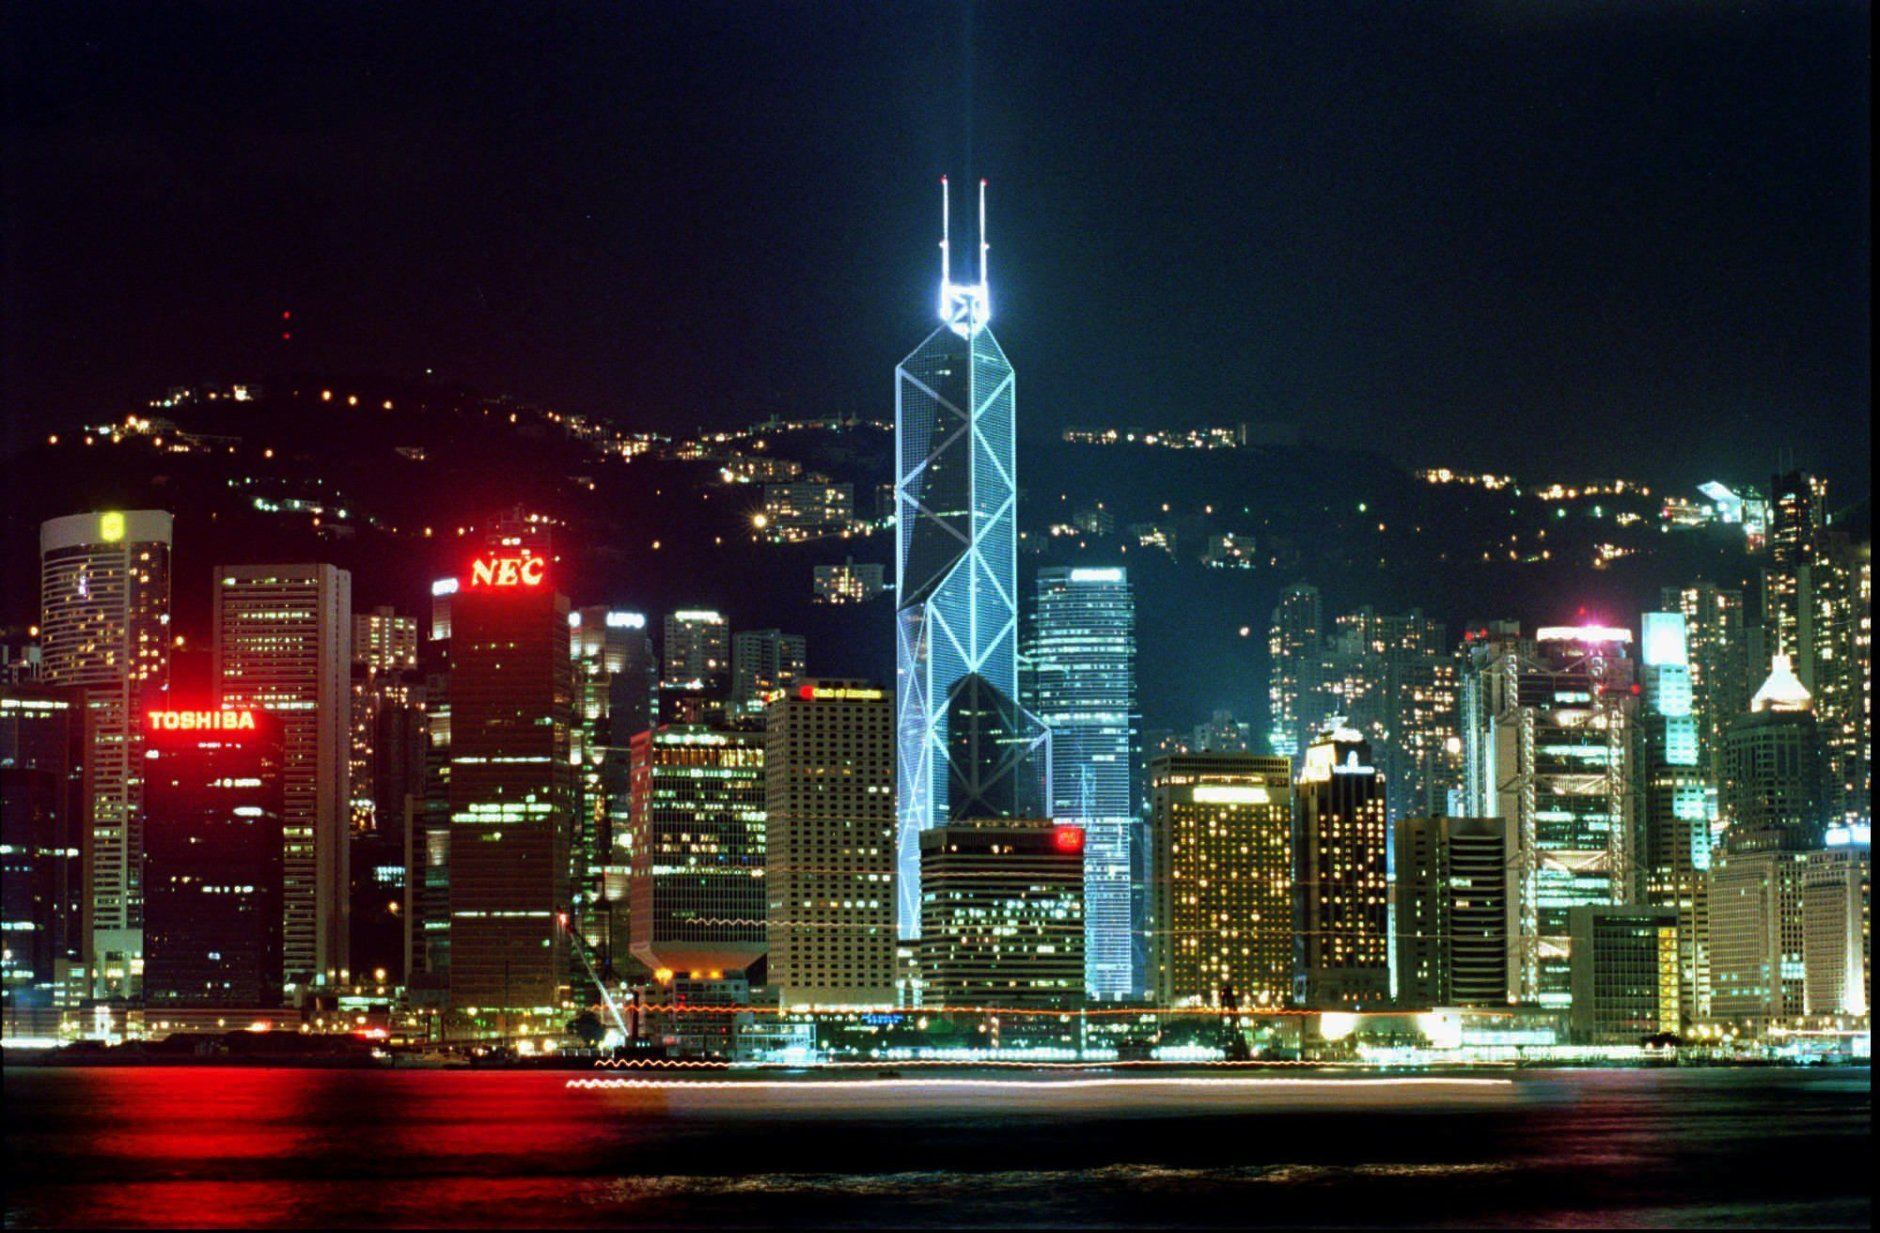 HONG KONG 1997 PHOTO PACKAGE GENERAL VIEW -Third of 8- The Victoria Harbor skyline is illuminated by commercial buildings along the waterfront of Hong Kong Island. The Bank of China building, center, designed by Chinese-American architect I.M. Pei to look like an angular bamboo shoot, was completed in 1989. It is one of Hong Kong's most recognized landmarks and a symbol of China's strong economic stake in the territory. Picture taken on Saturday, Sept. 7, 1996. (AP Photo/Anat Givon)